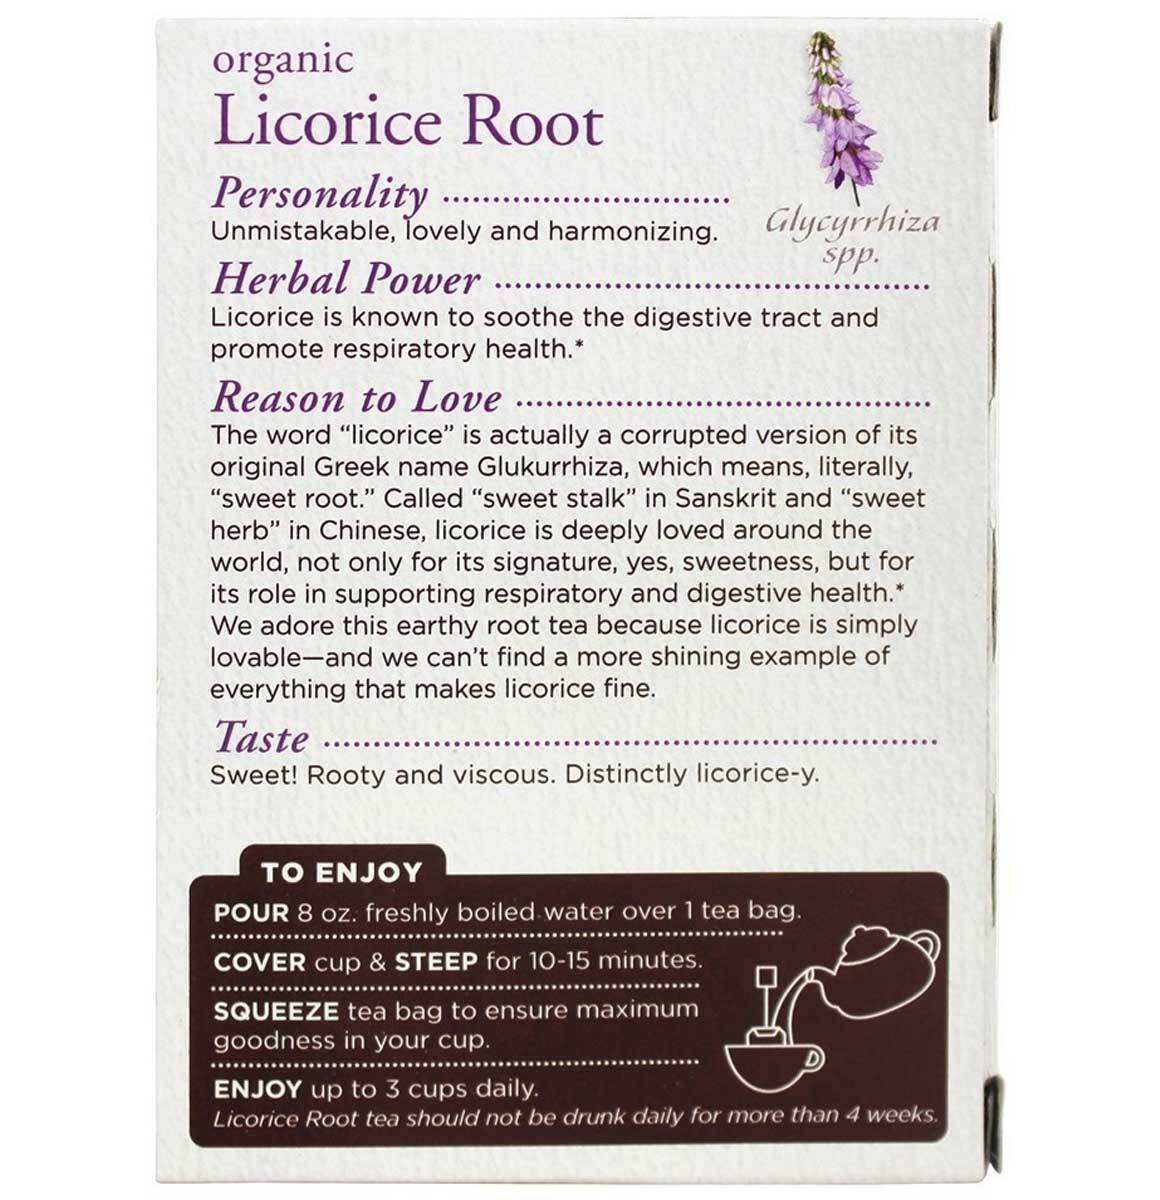 Traditional Medicinals Organic Licorice Root Tea Bags - 16 Ct - Pack of 6 Traditional Medicinals Does not apply - фотография #2